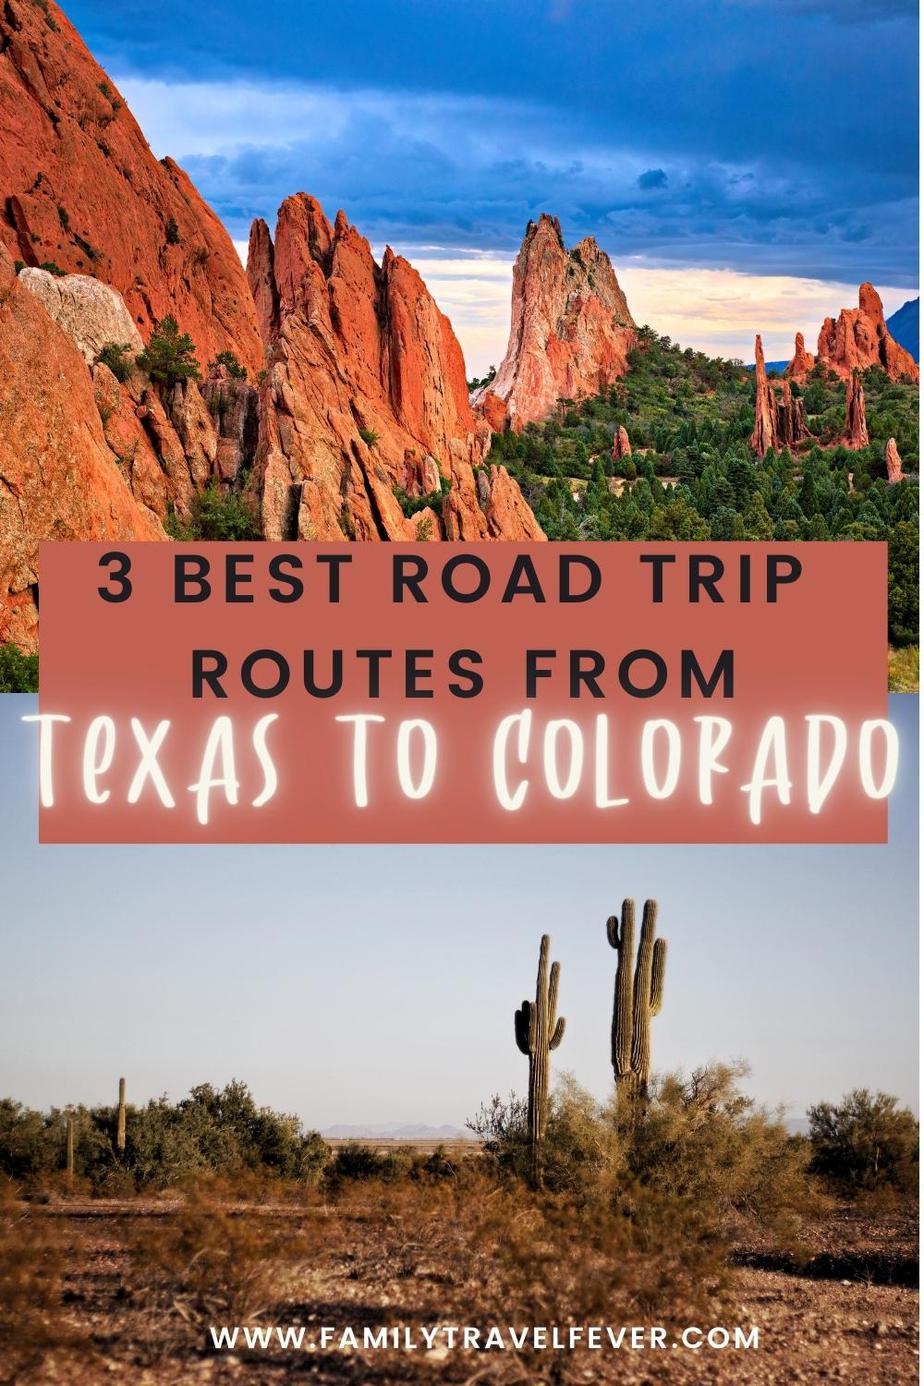 Article for the best road trip routes from Texas to Colorado